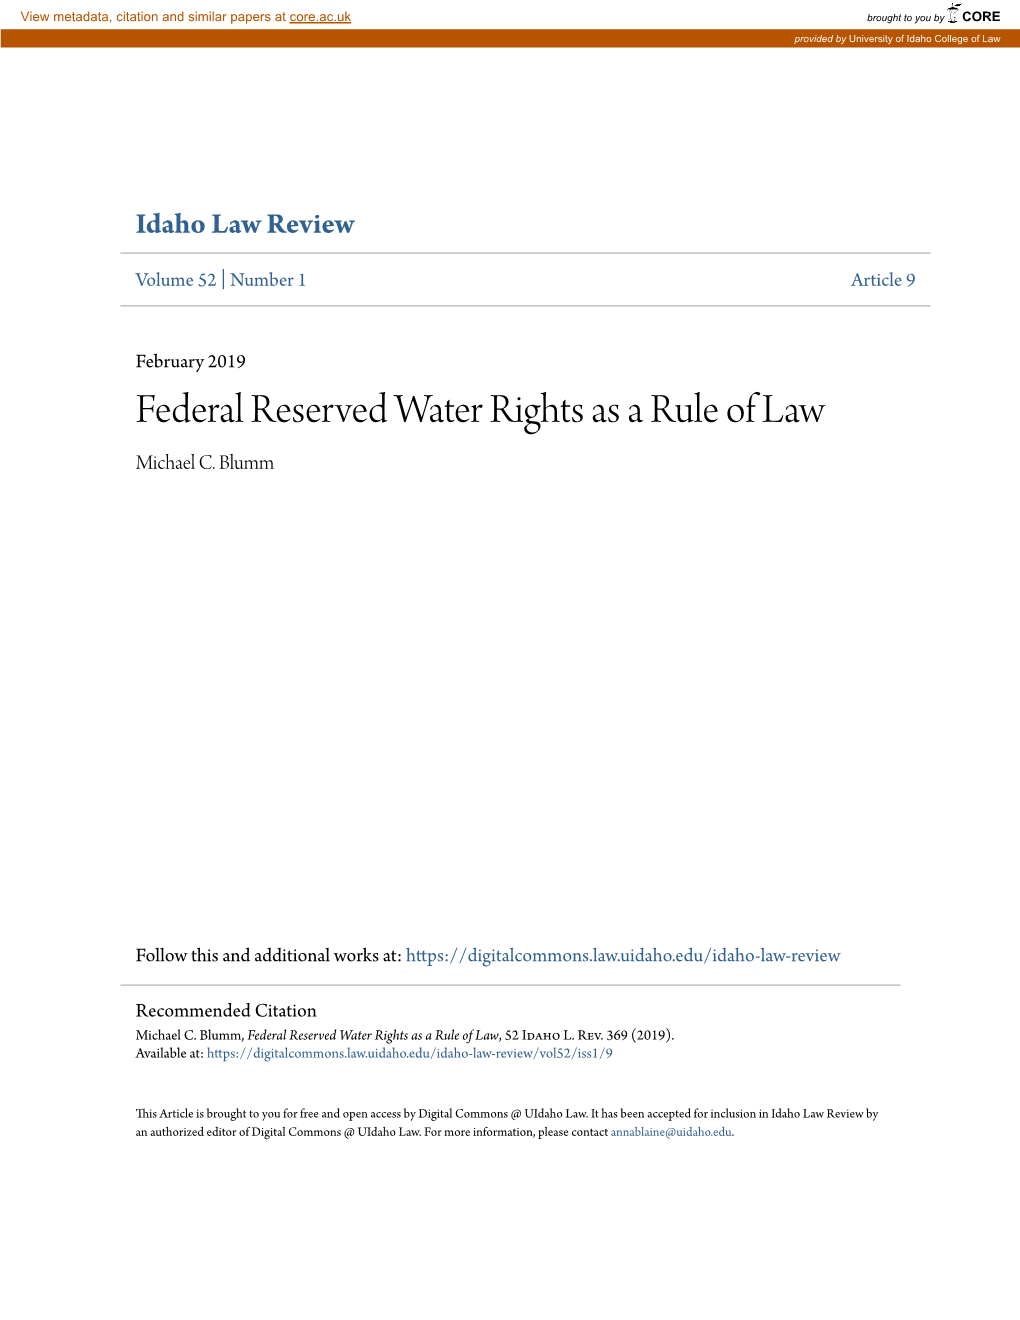 Federal Reserved Water Rights As a Rule of Law Michael C